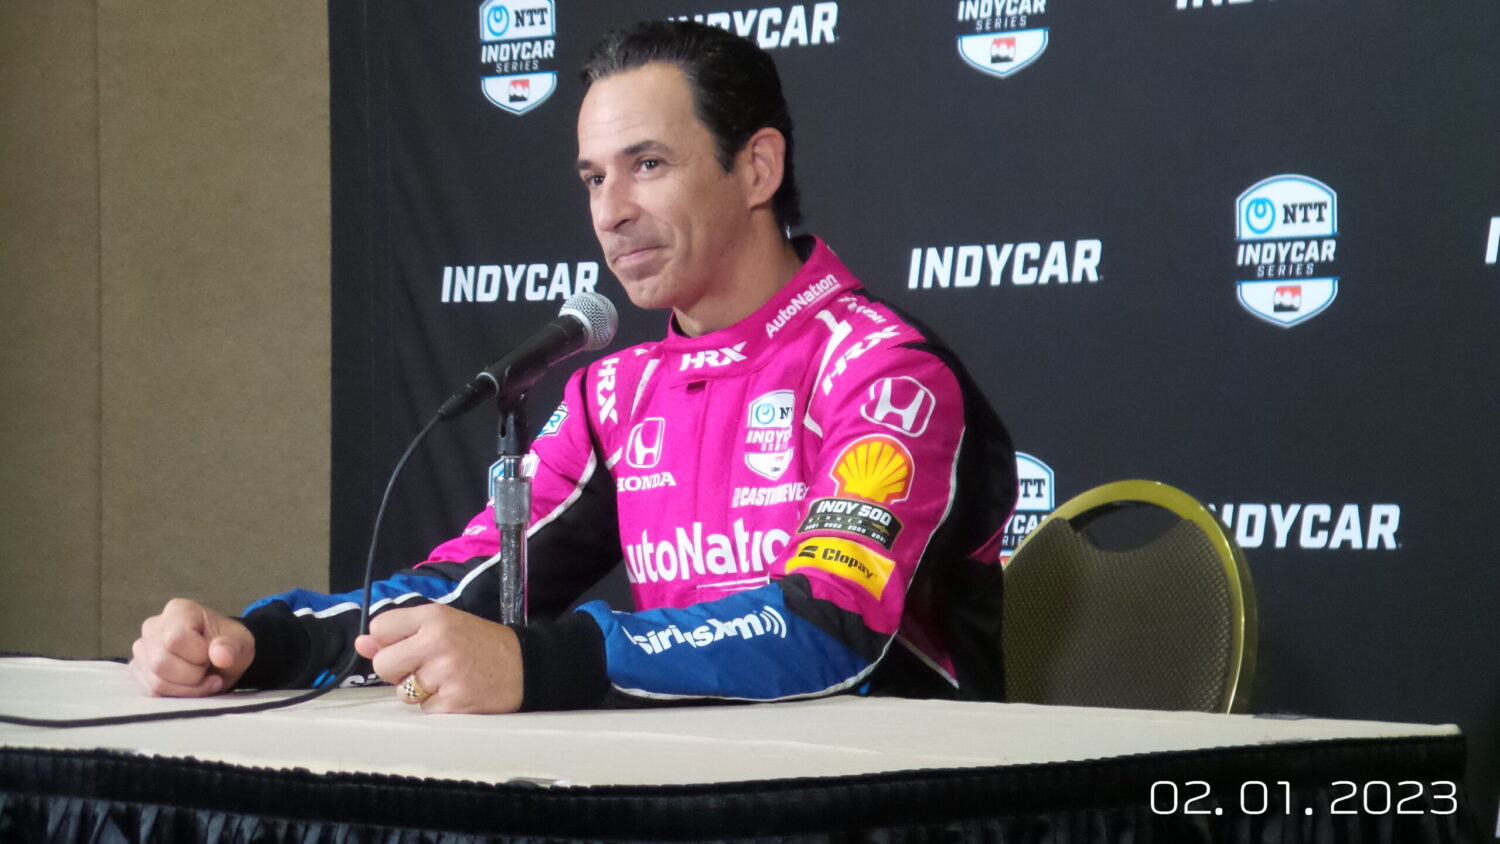 Helio Castroneves Photo by Lucille Dust/AR1.com